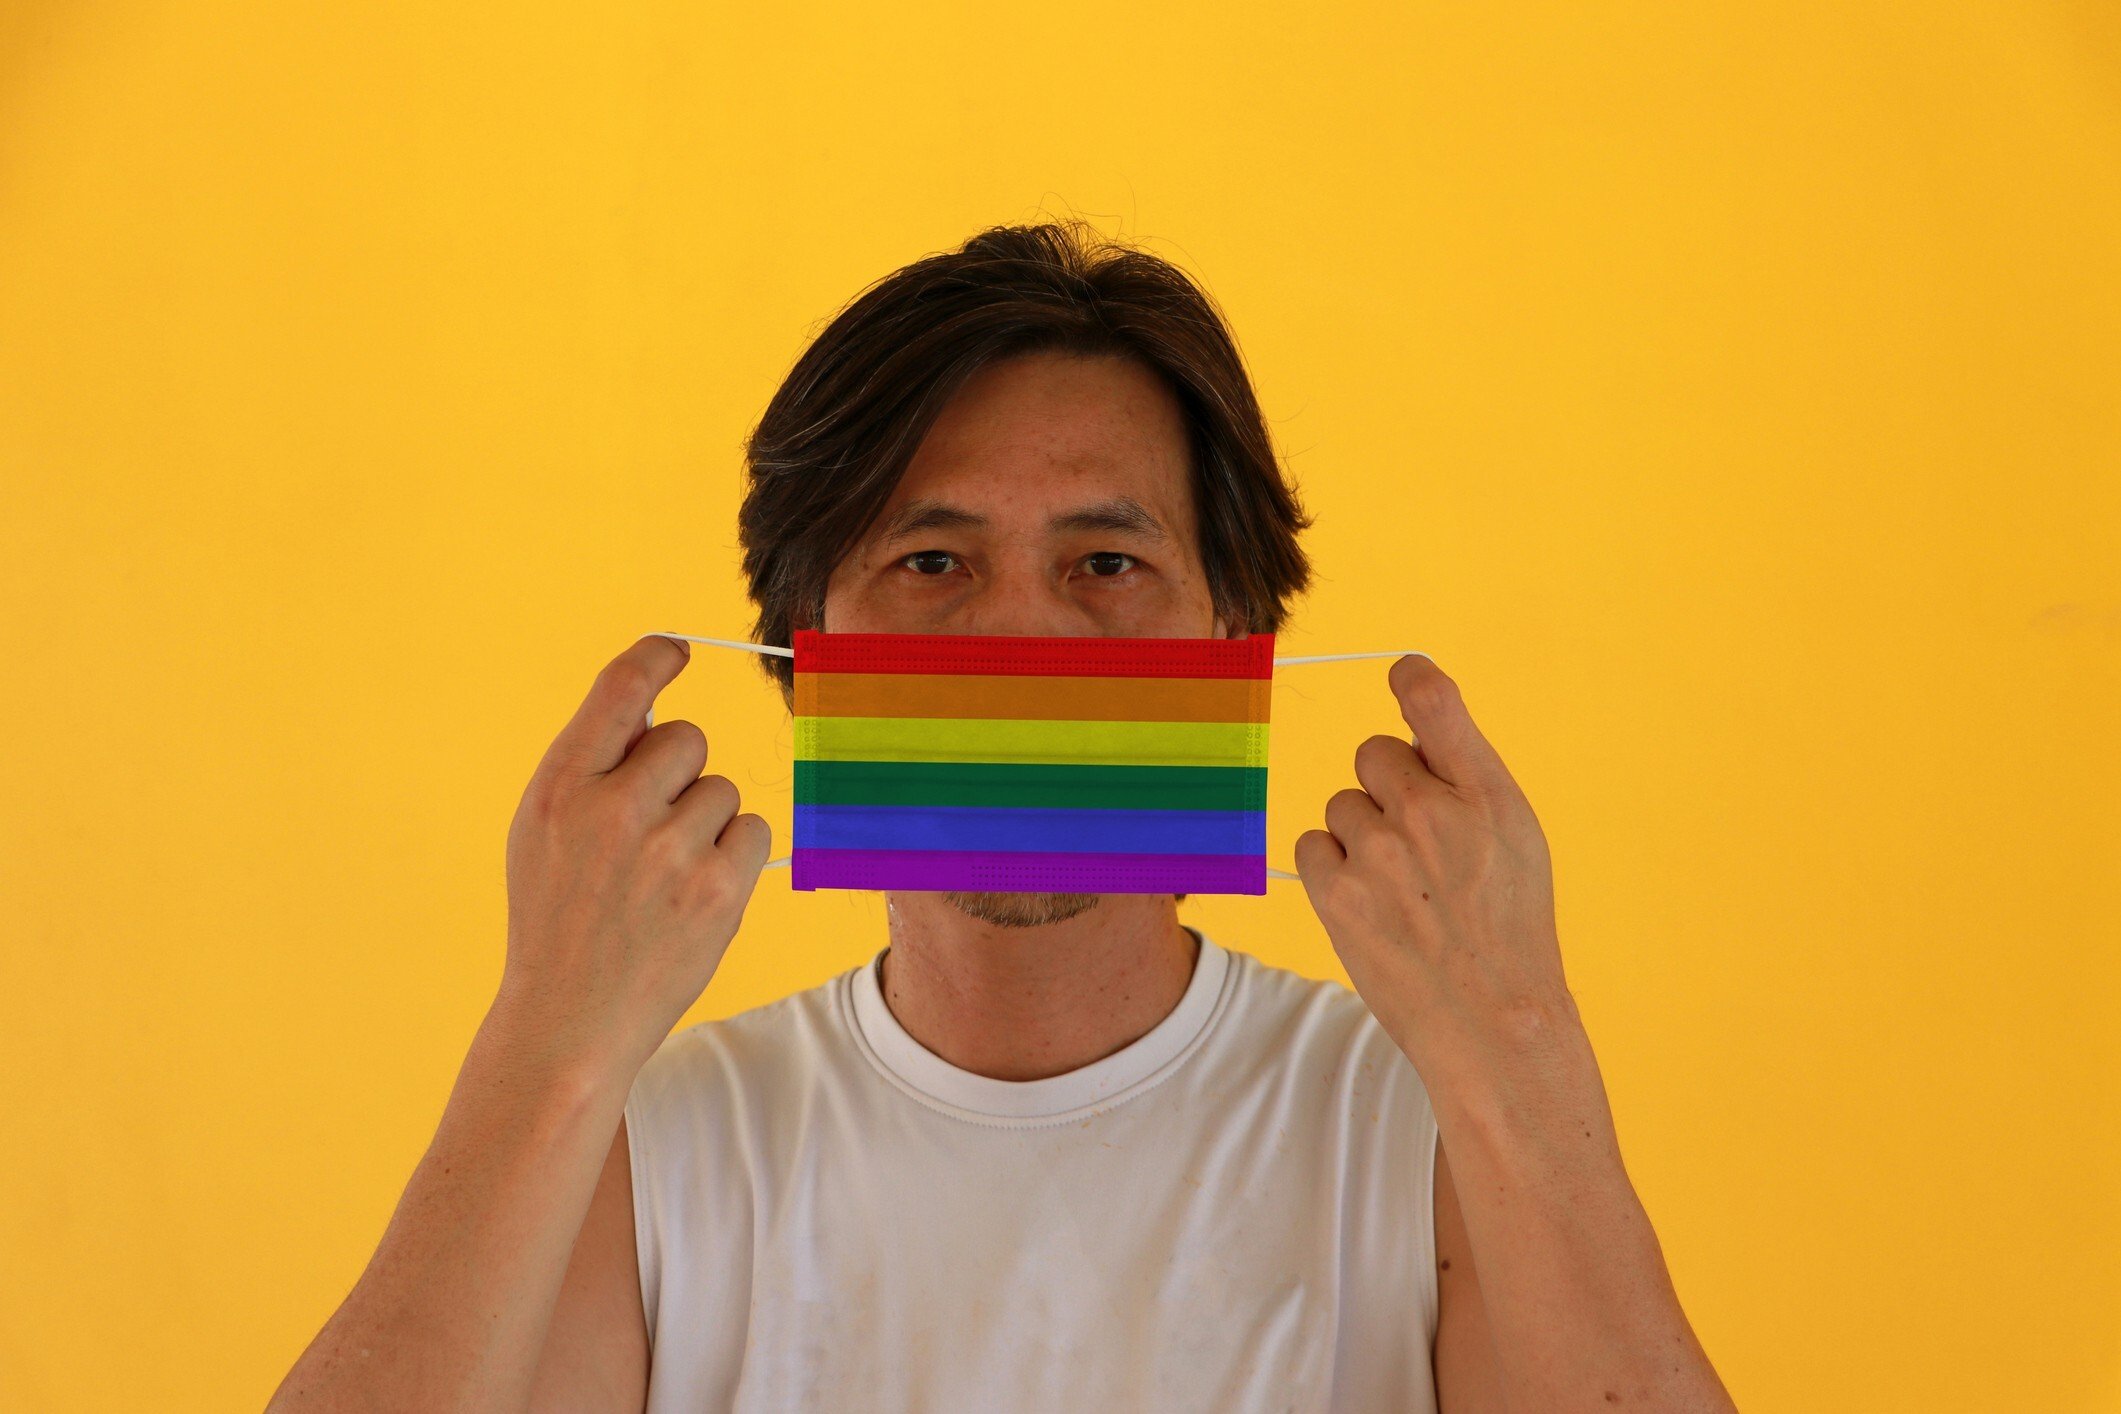 For LGBT communities in China that already feel marginalised, the new rules on internet publishing are even more concerning. Photo: Getty Images/iStockphoto